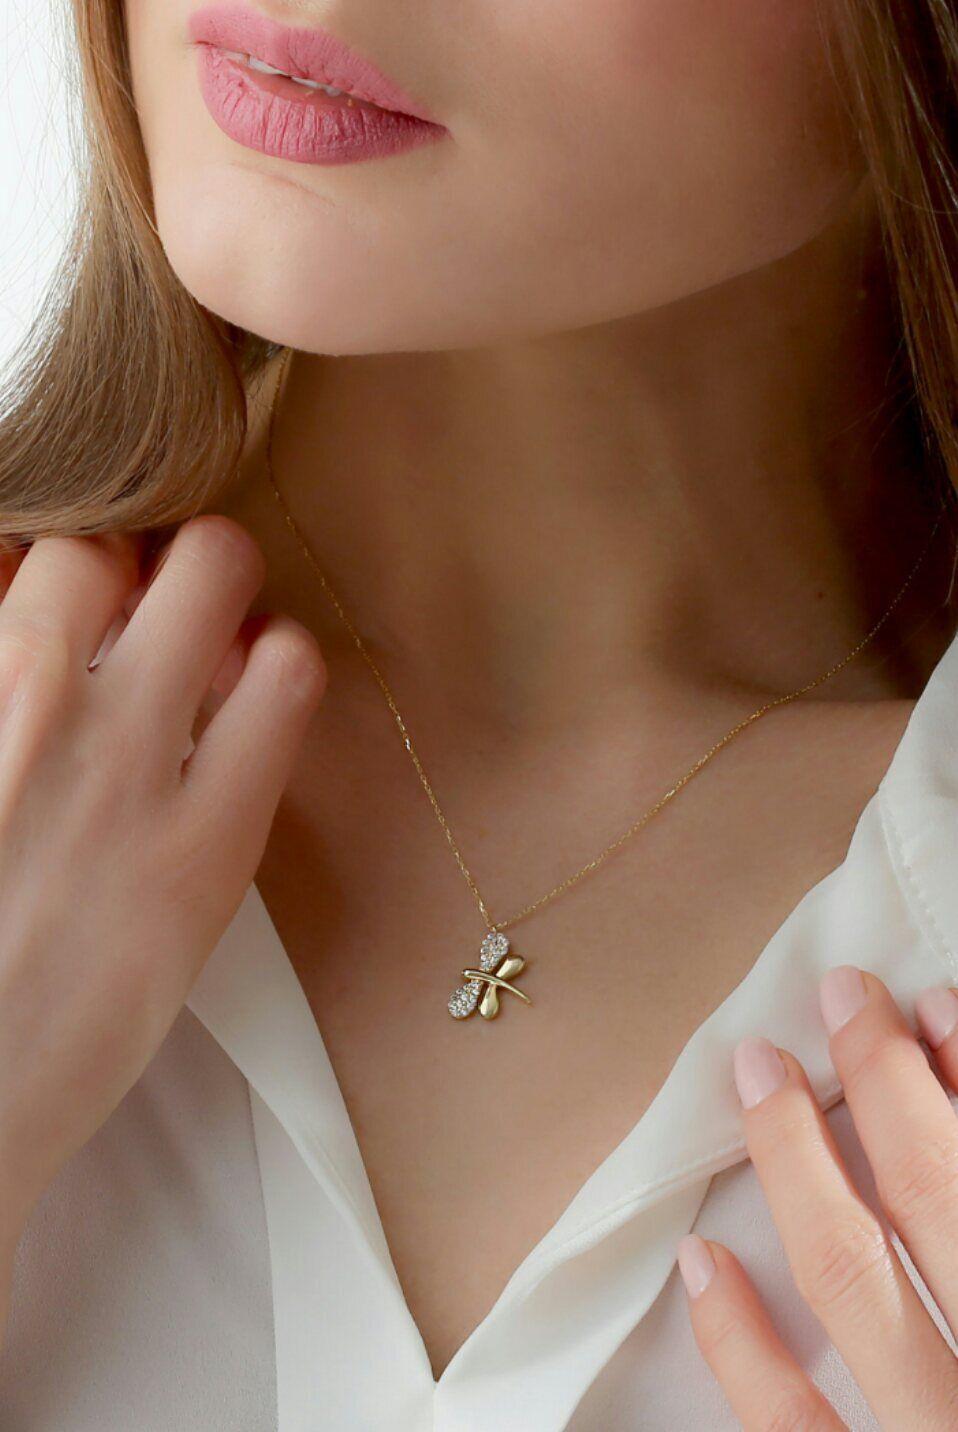 Brilliant Cut 14k Solid Yellow Gold Dragonfly Diamond Necklace Pendant Gold Dragonfly Necklace For Sale